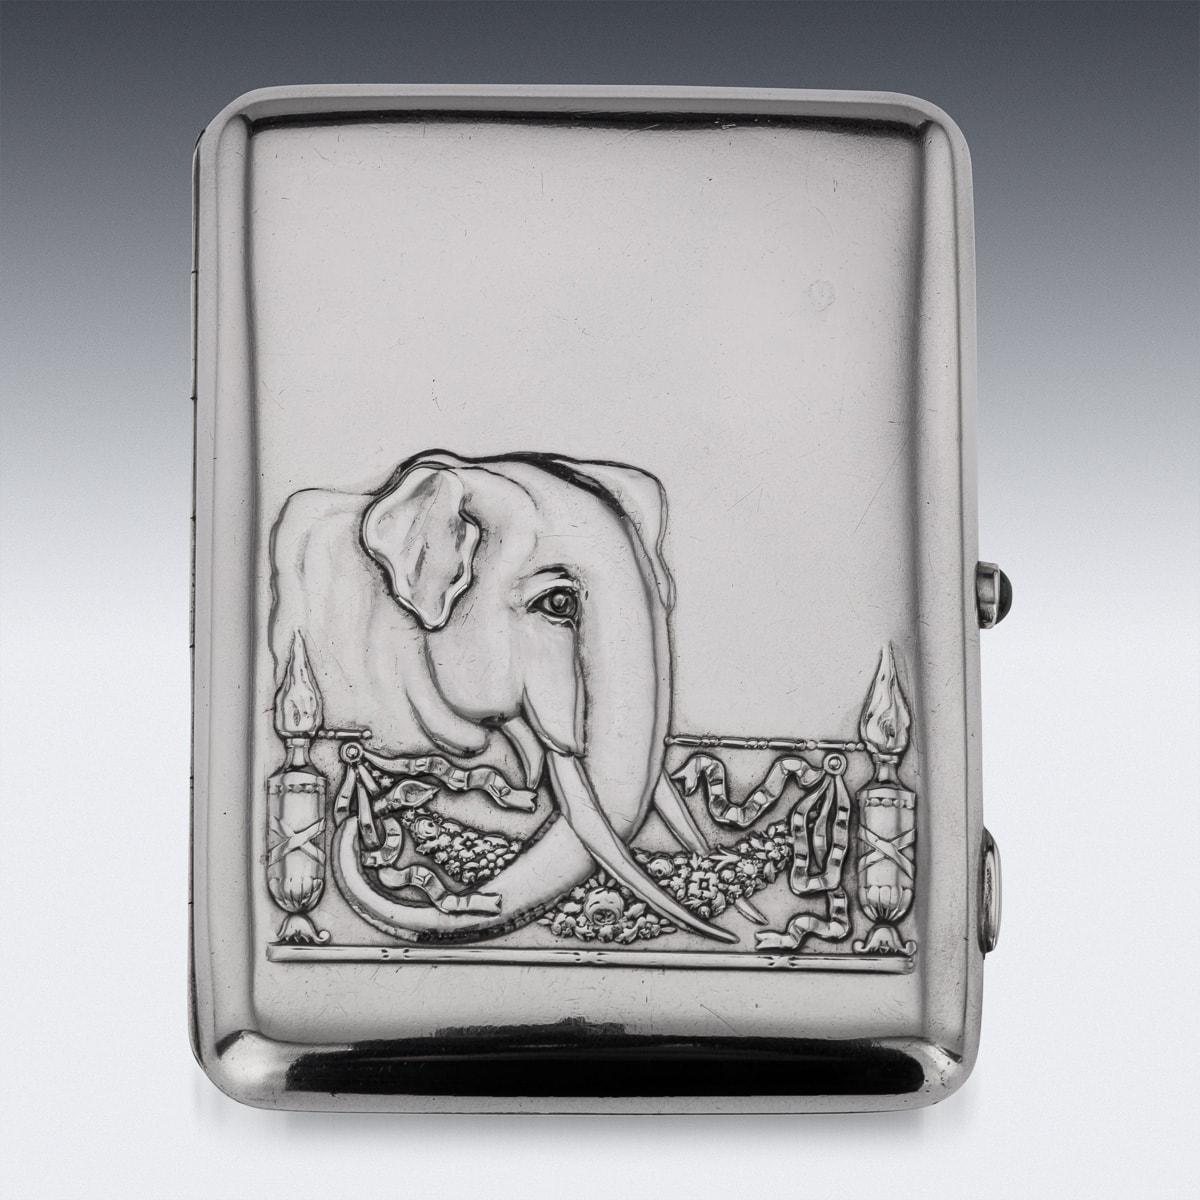 Antique late 19th Century Imperial Russian solid silver cigarette case, with richly parcel gilt interior, of rectangular form with curved corners, the hinged cover beautifully decorated depicting an elephant behind a stylized empire style fence,